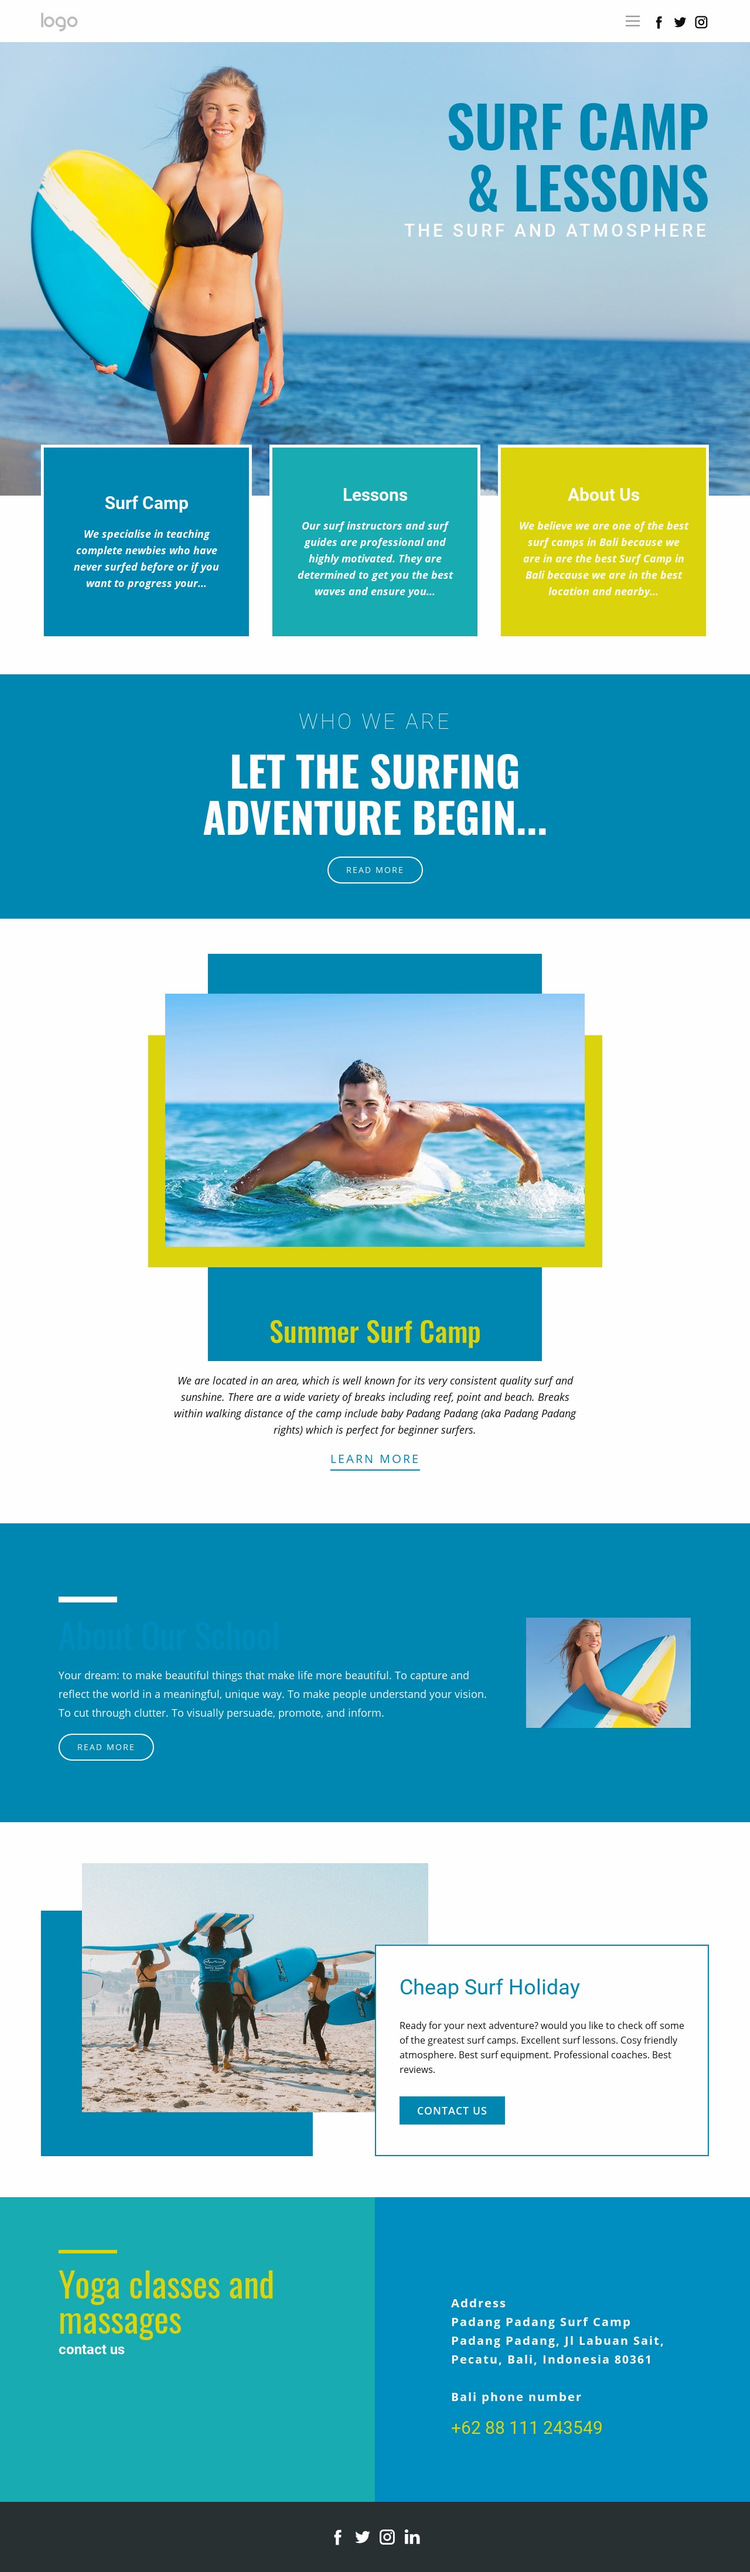 Camp for summer sports Web Page Design